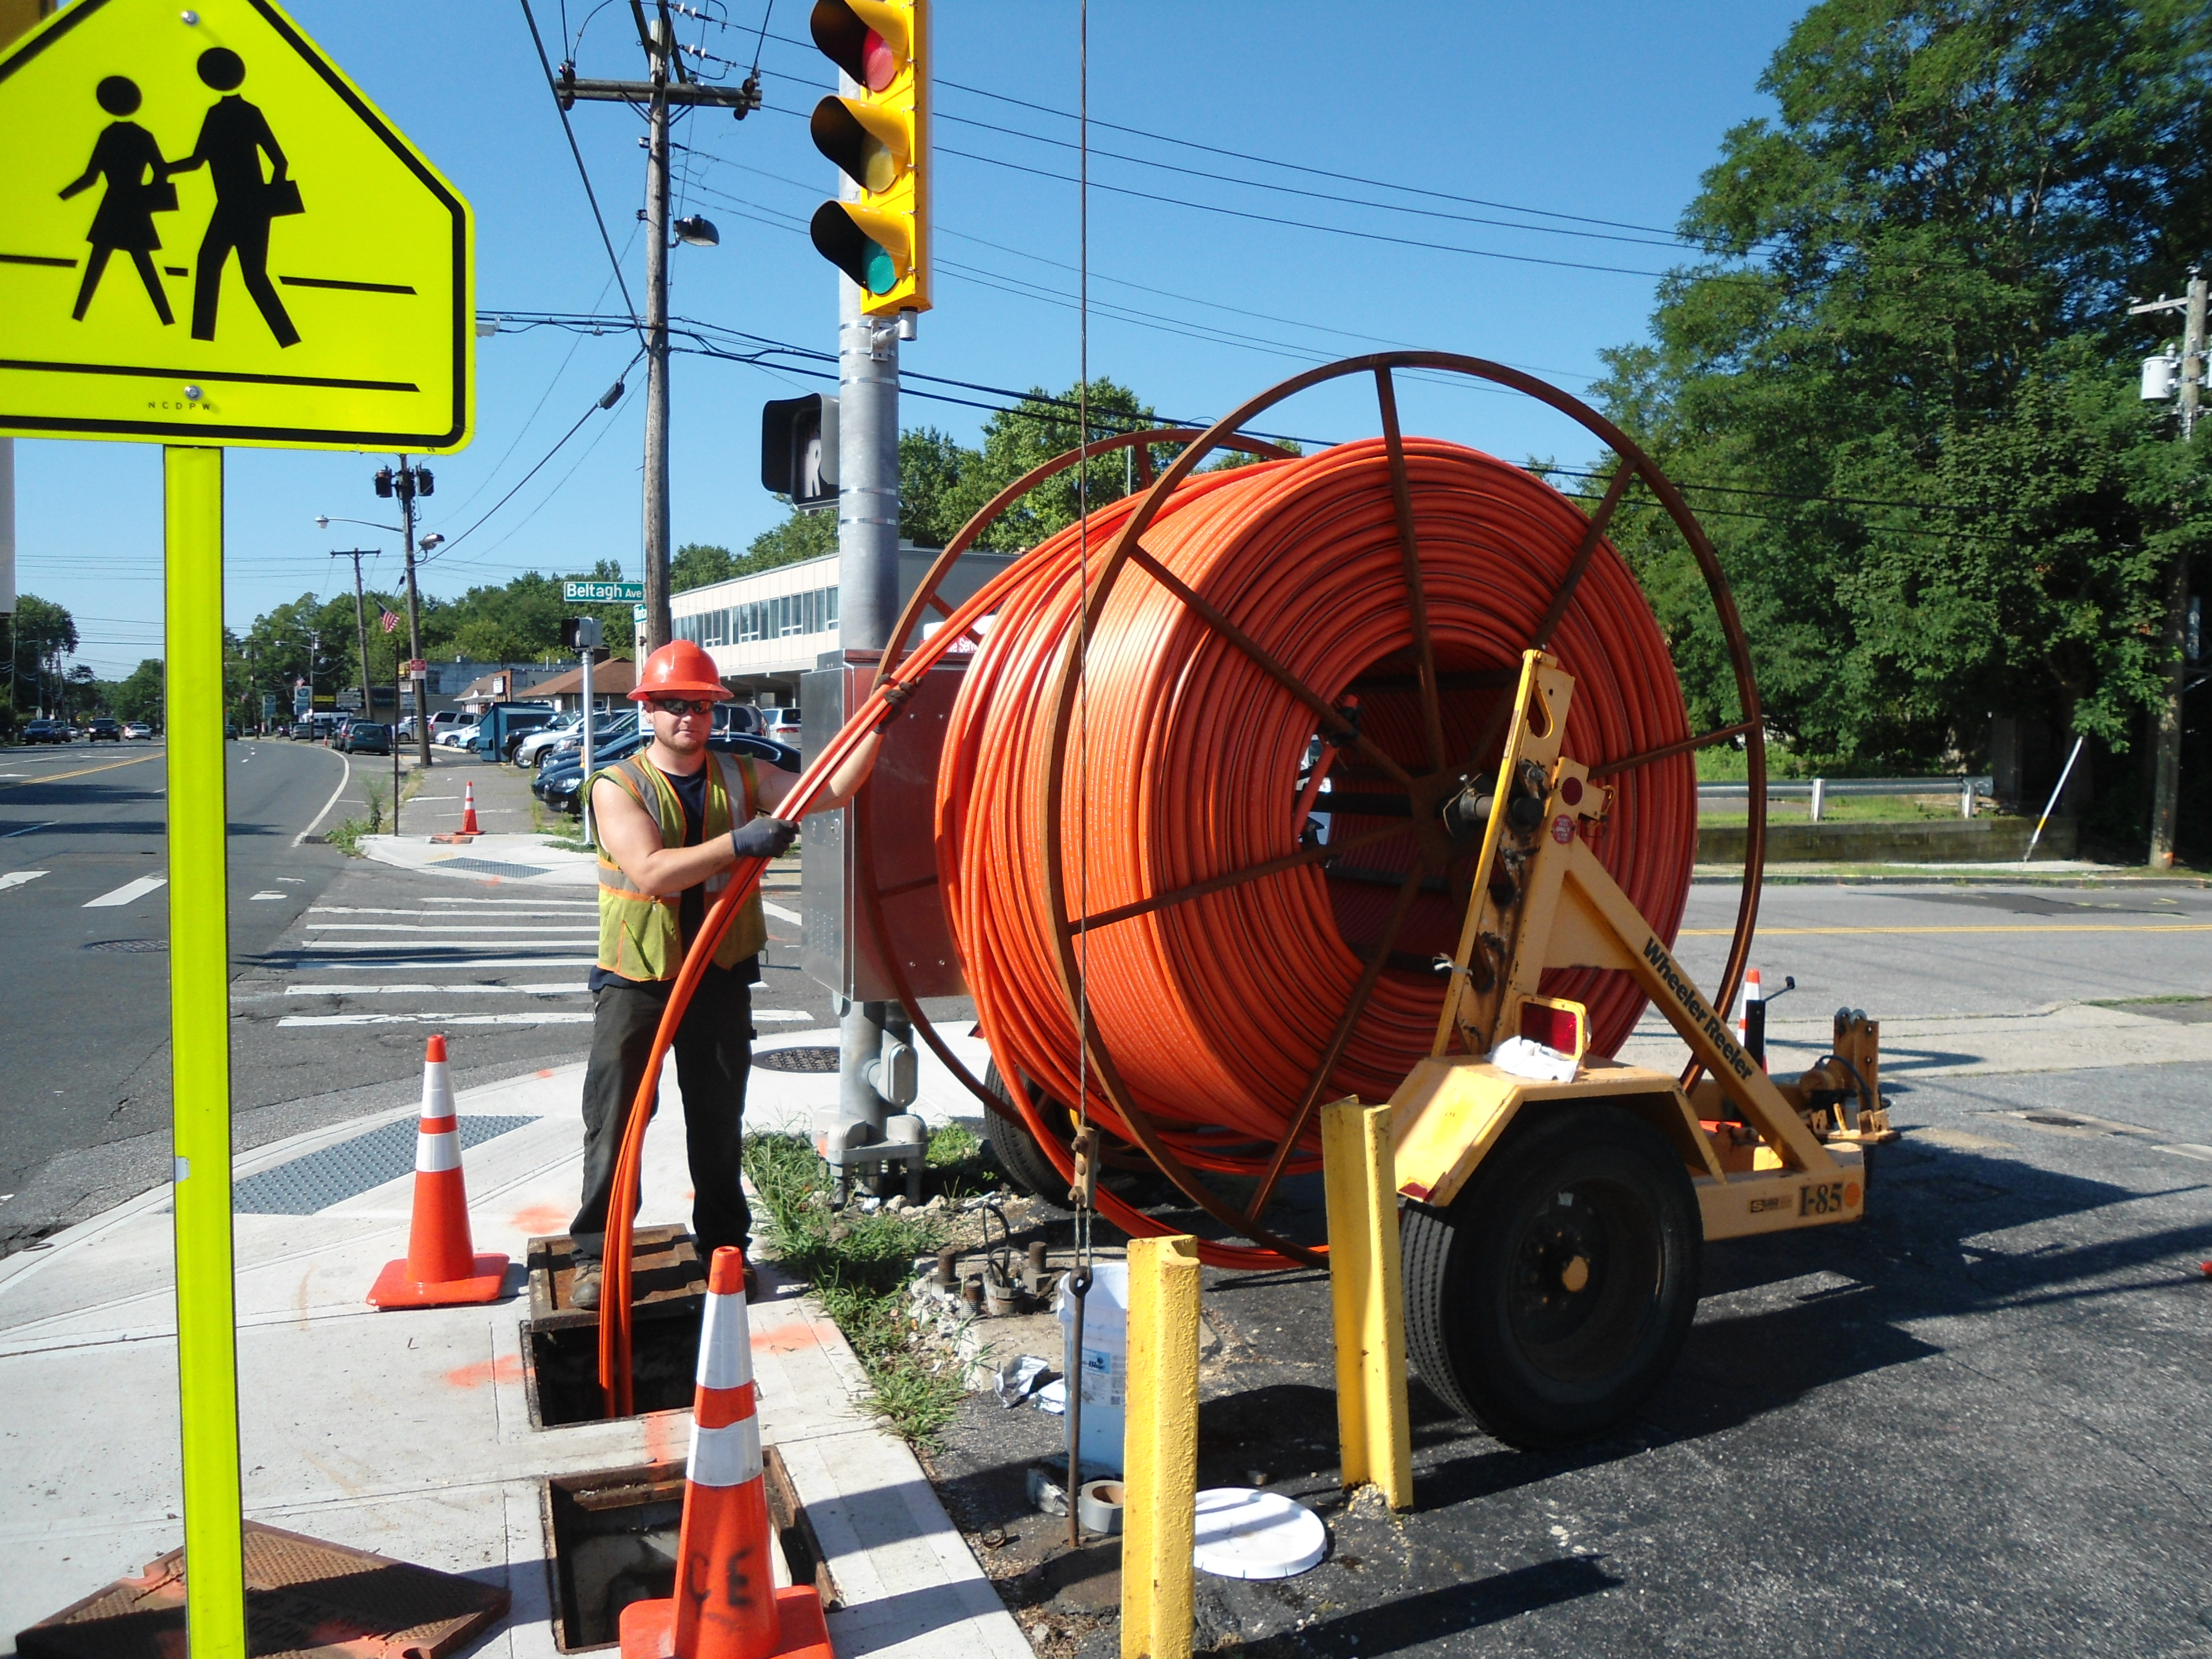 Employee working on the street with a giant spool of orange hose